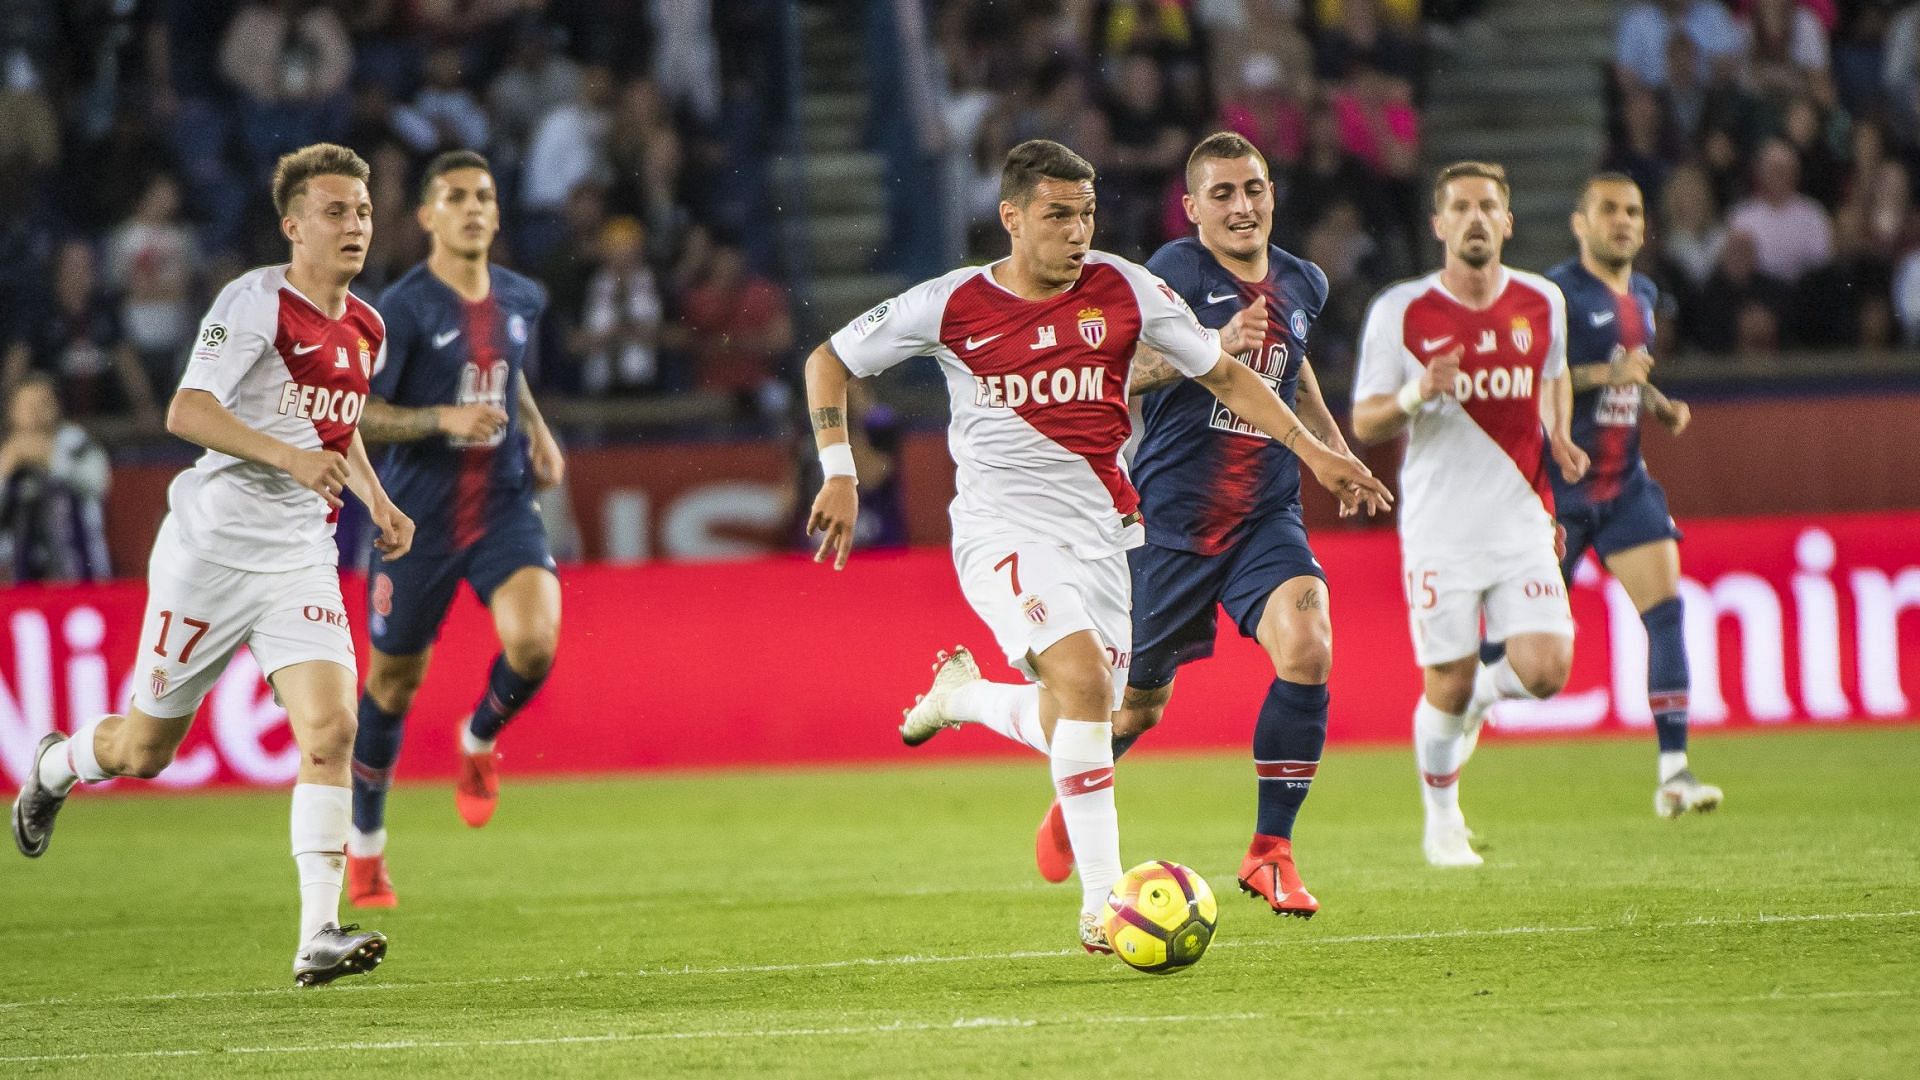 Monaco and PSG players tussle for the ball in midfield during their Ligue 1 clash.